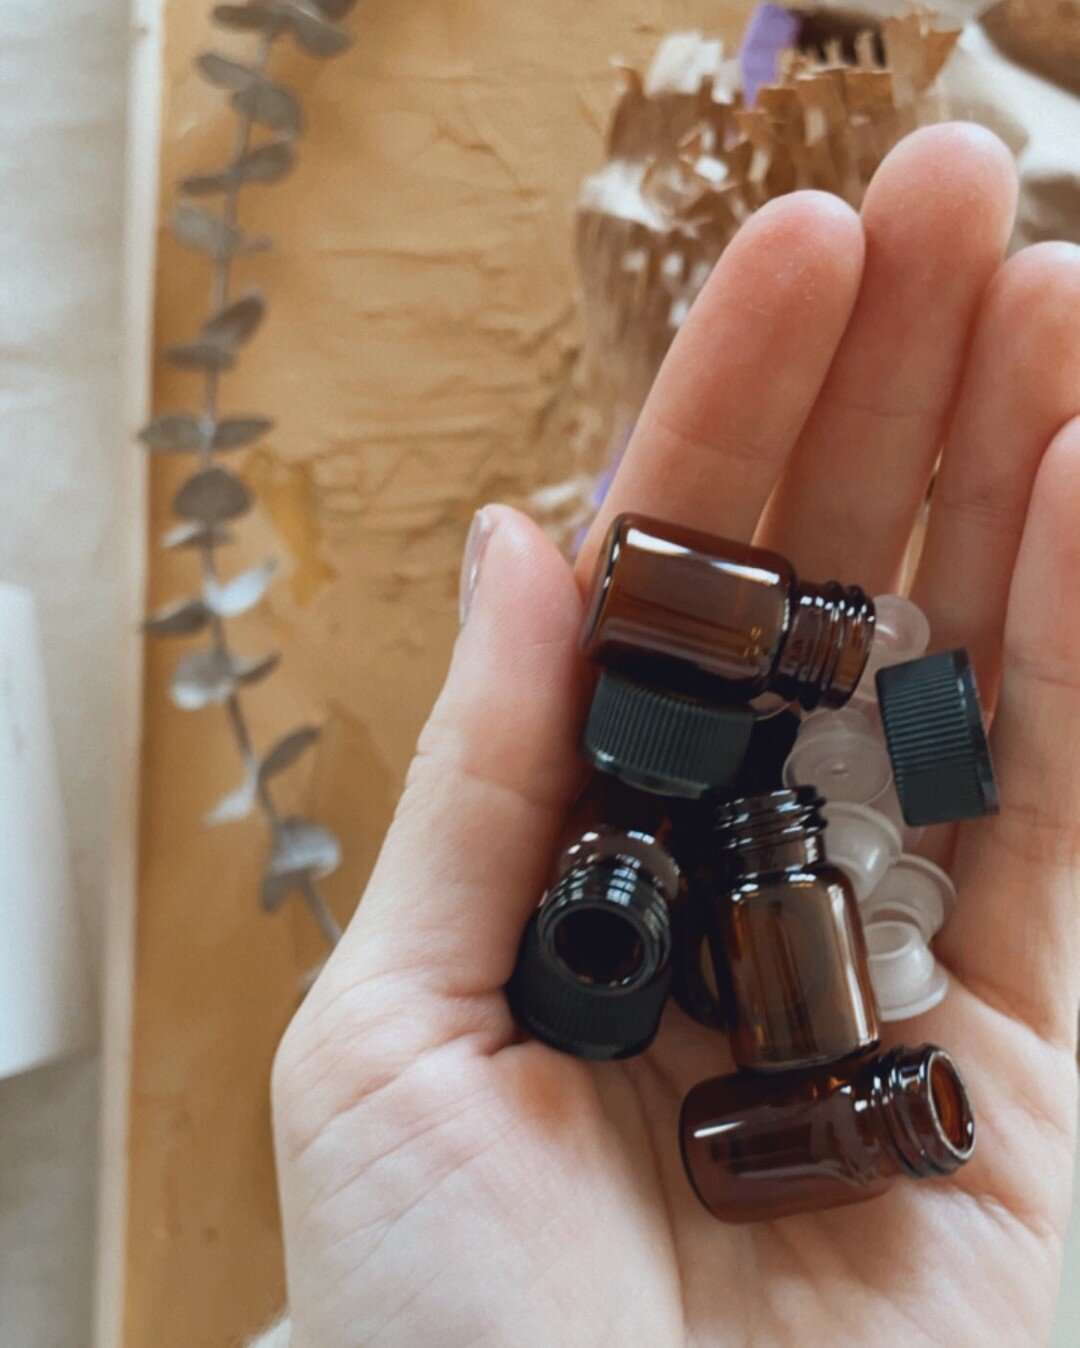 Here's the deal. I diffuse my oils when I paint. The oils that I am diffusing without a doubt play a part in my creative process. I am realizing how awesome and powerful this really is &amp; want to make it more of a shared experience. ⠀⠀⠀⠀⠀⠀⠀⠀⠀
.⠀⠀⠀